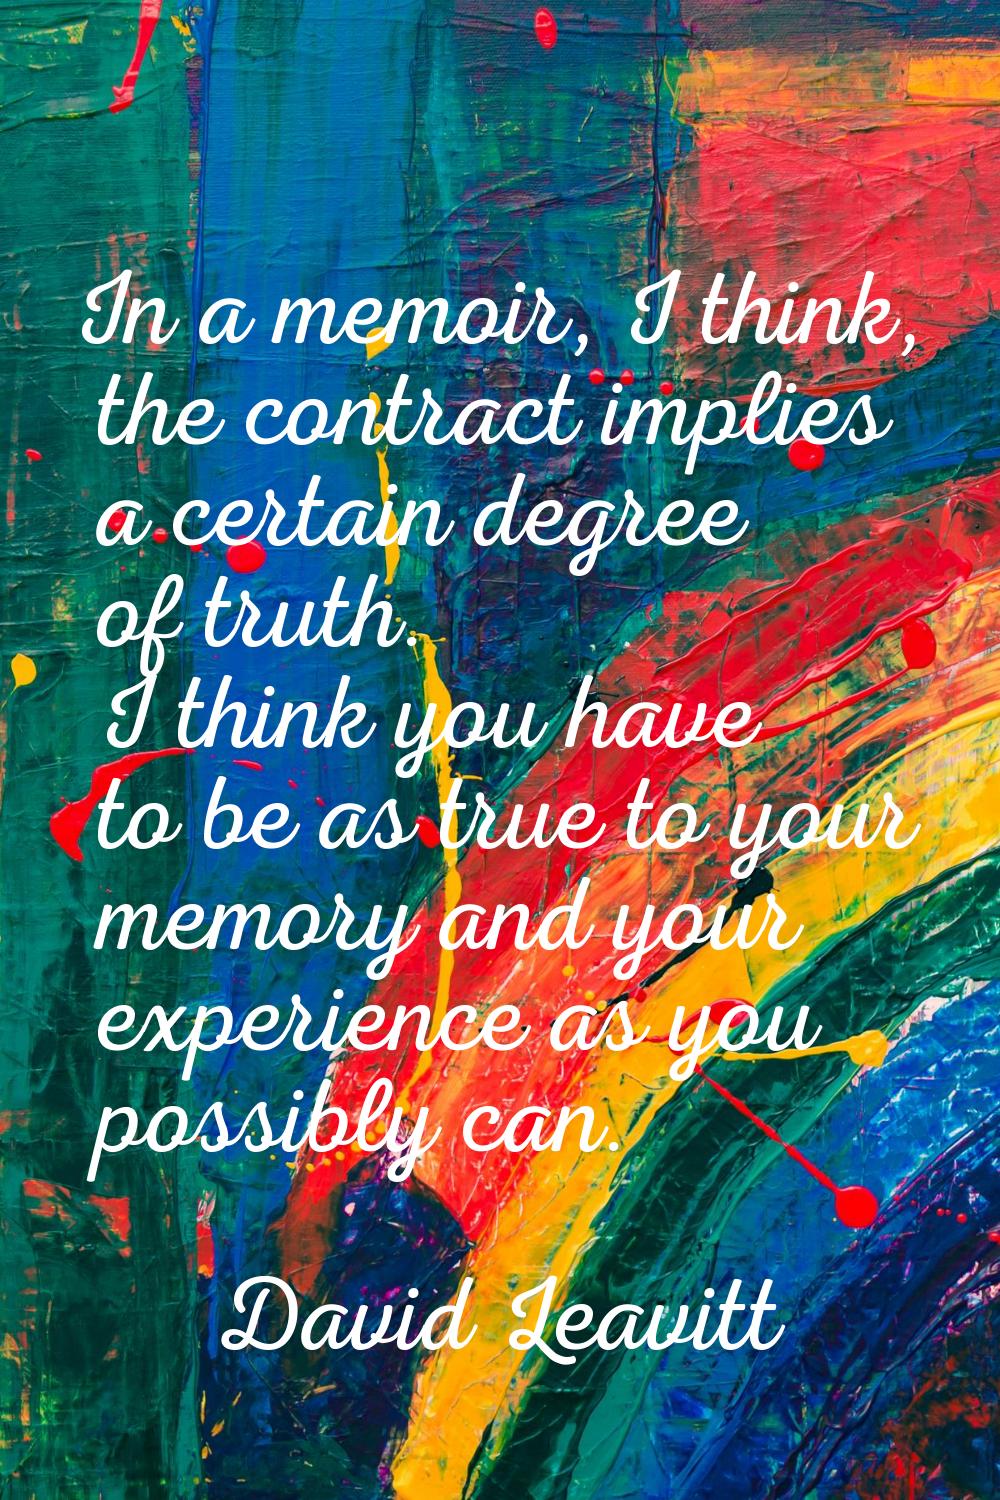 In a memoir, I think, the contract implies a certain degree of truth. I think you have to be as tru